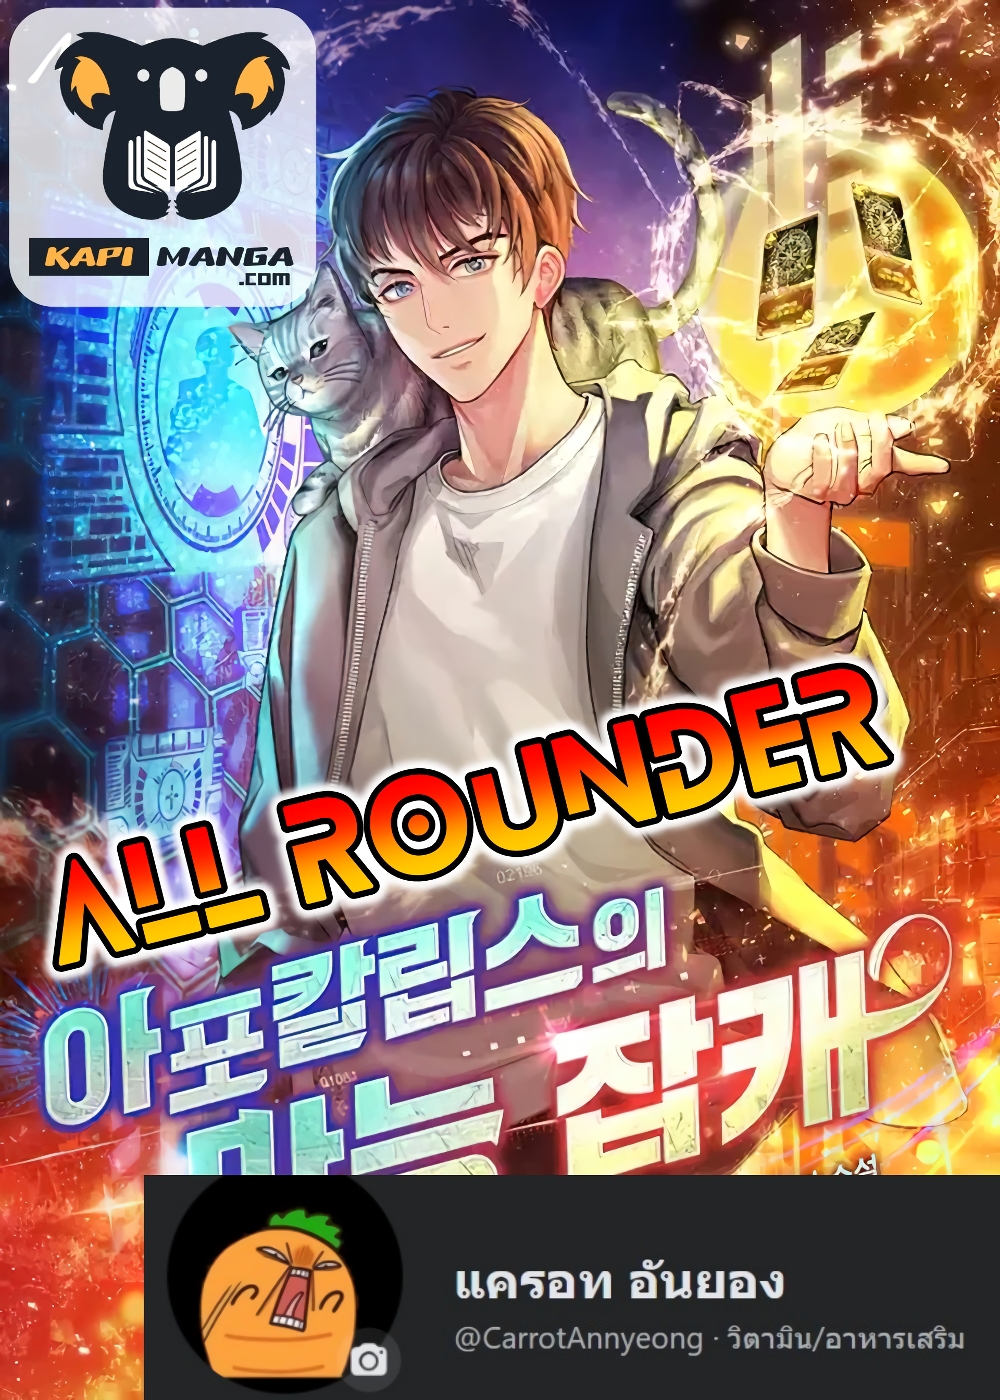 All Rounder 23 (1)